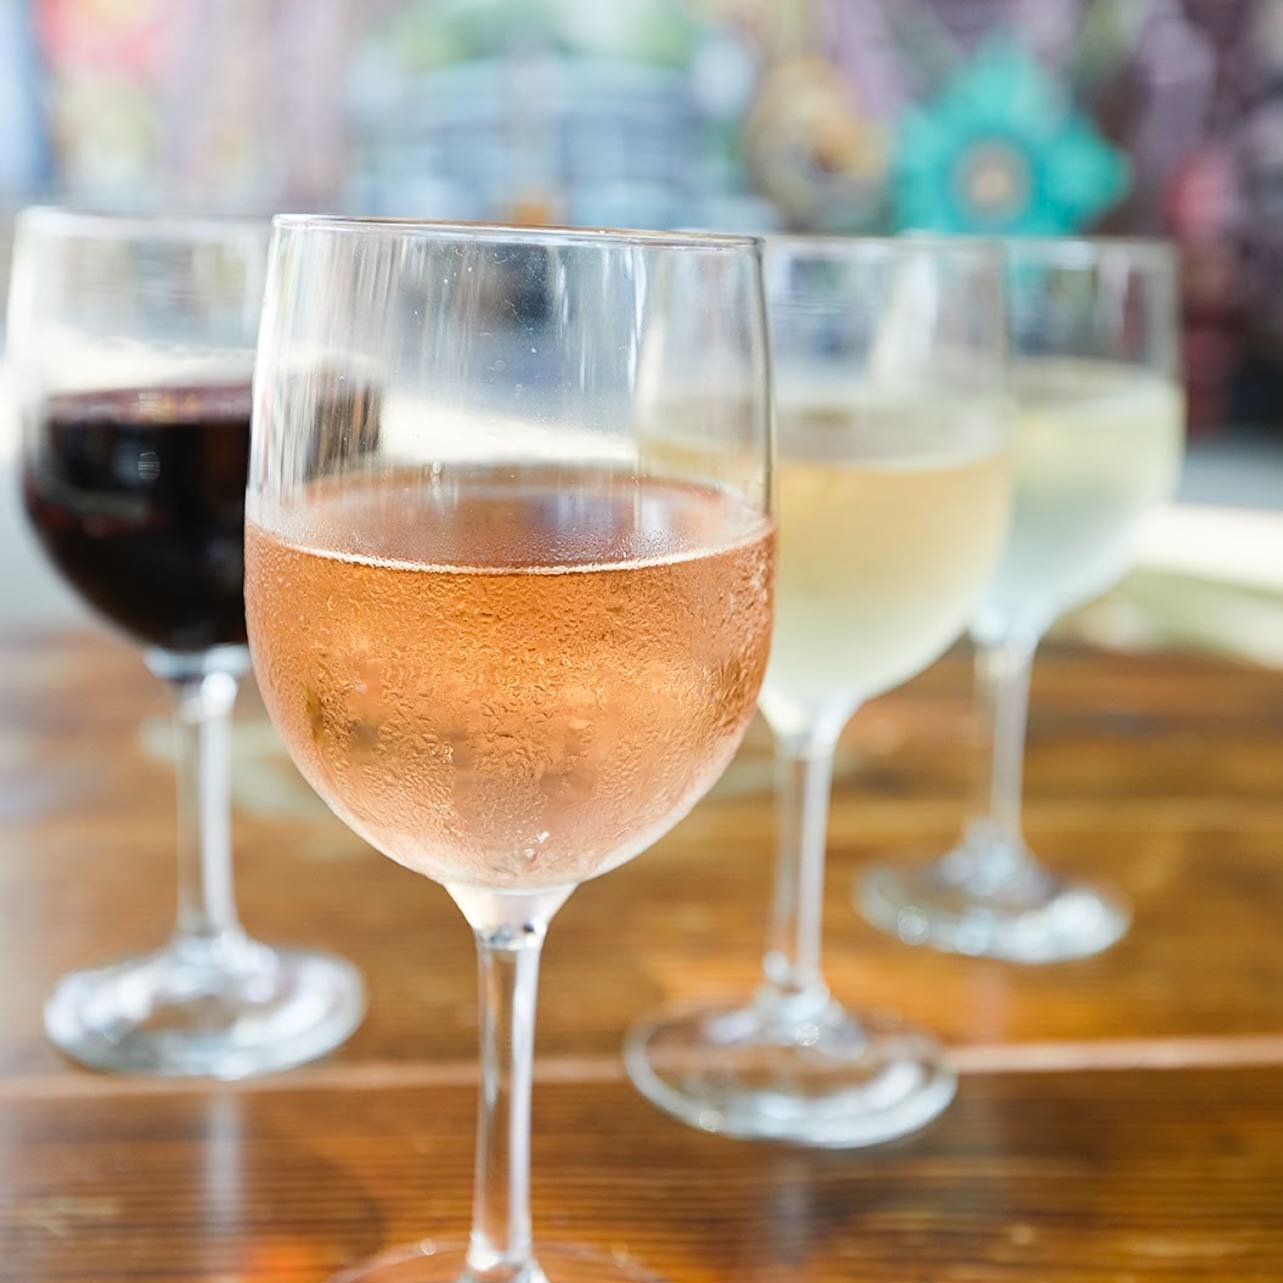 Did you know Marian&rsquo;s now has $6 glasses of wines ALL DAY on Wednesday&rsquo;s!? Swing by tomorrow and have a glass or four. Open at 5! ❤️ 
&bull;
&bull;
&bull;
&bull;
&bull;
&bull;
&bull;
&bull;
&bull;
&bull;
&bull;
&bull;
&bull;
&bull;
&bull;